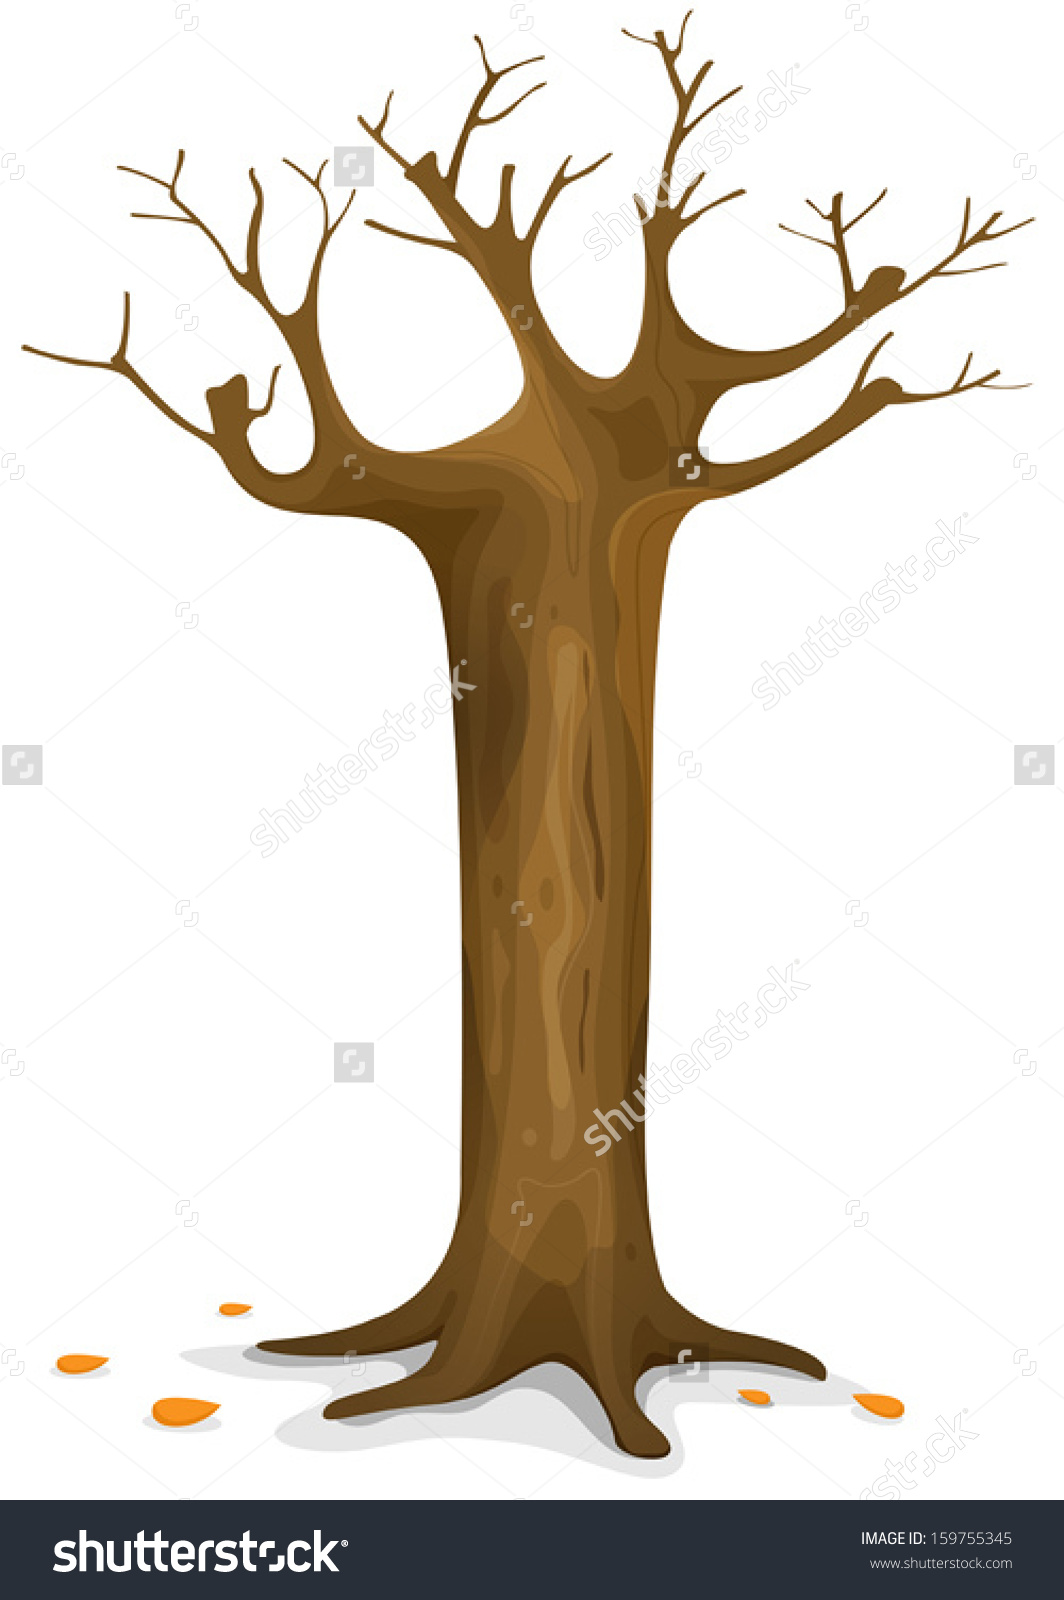 tree with trunk clipart branches - Clipground